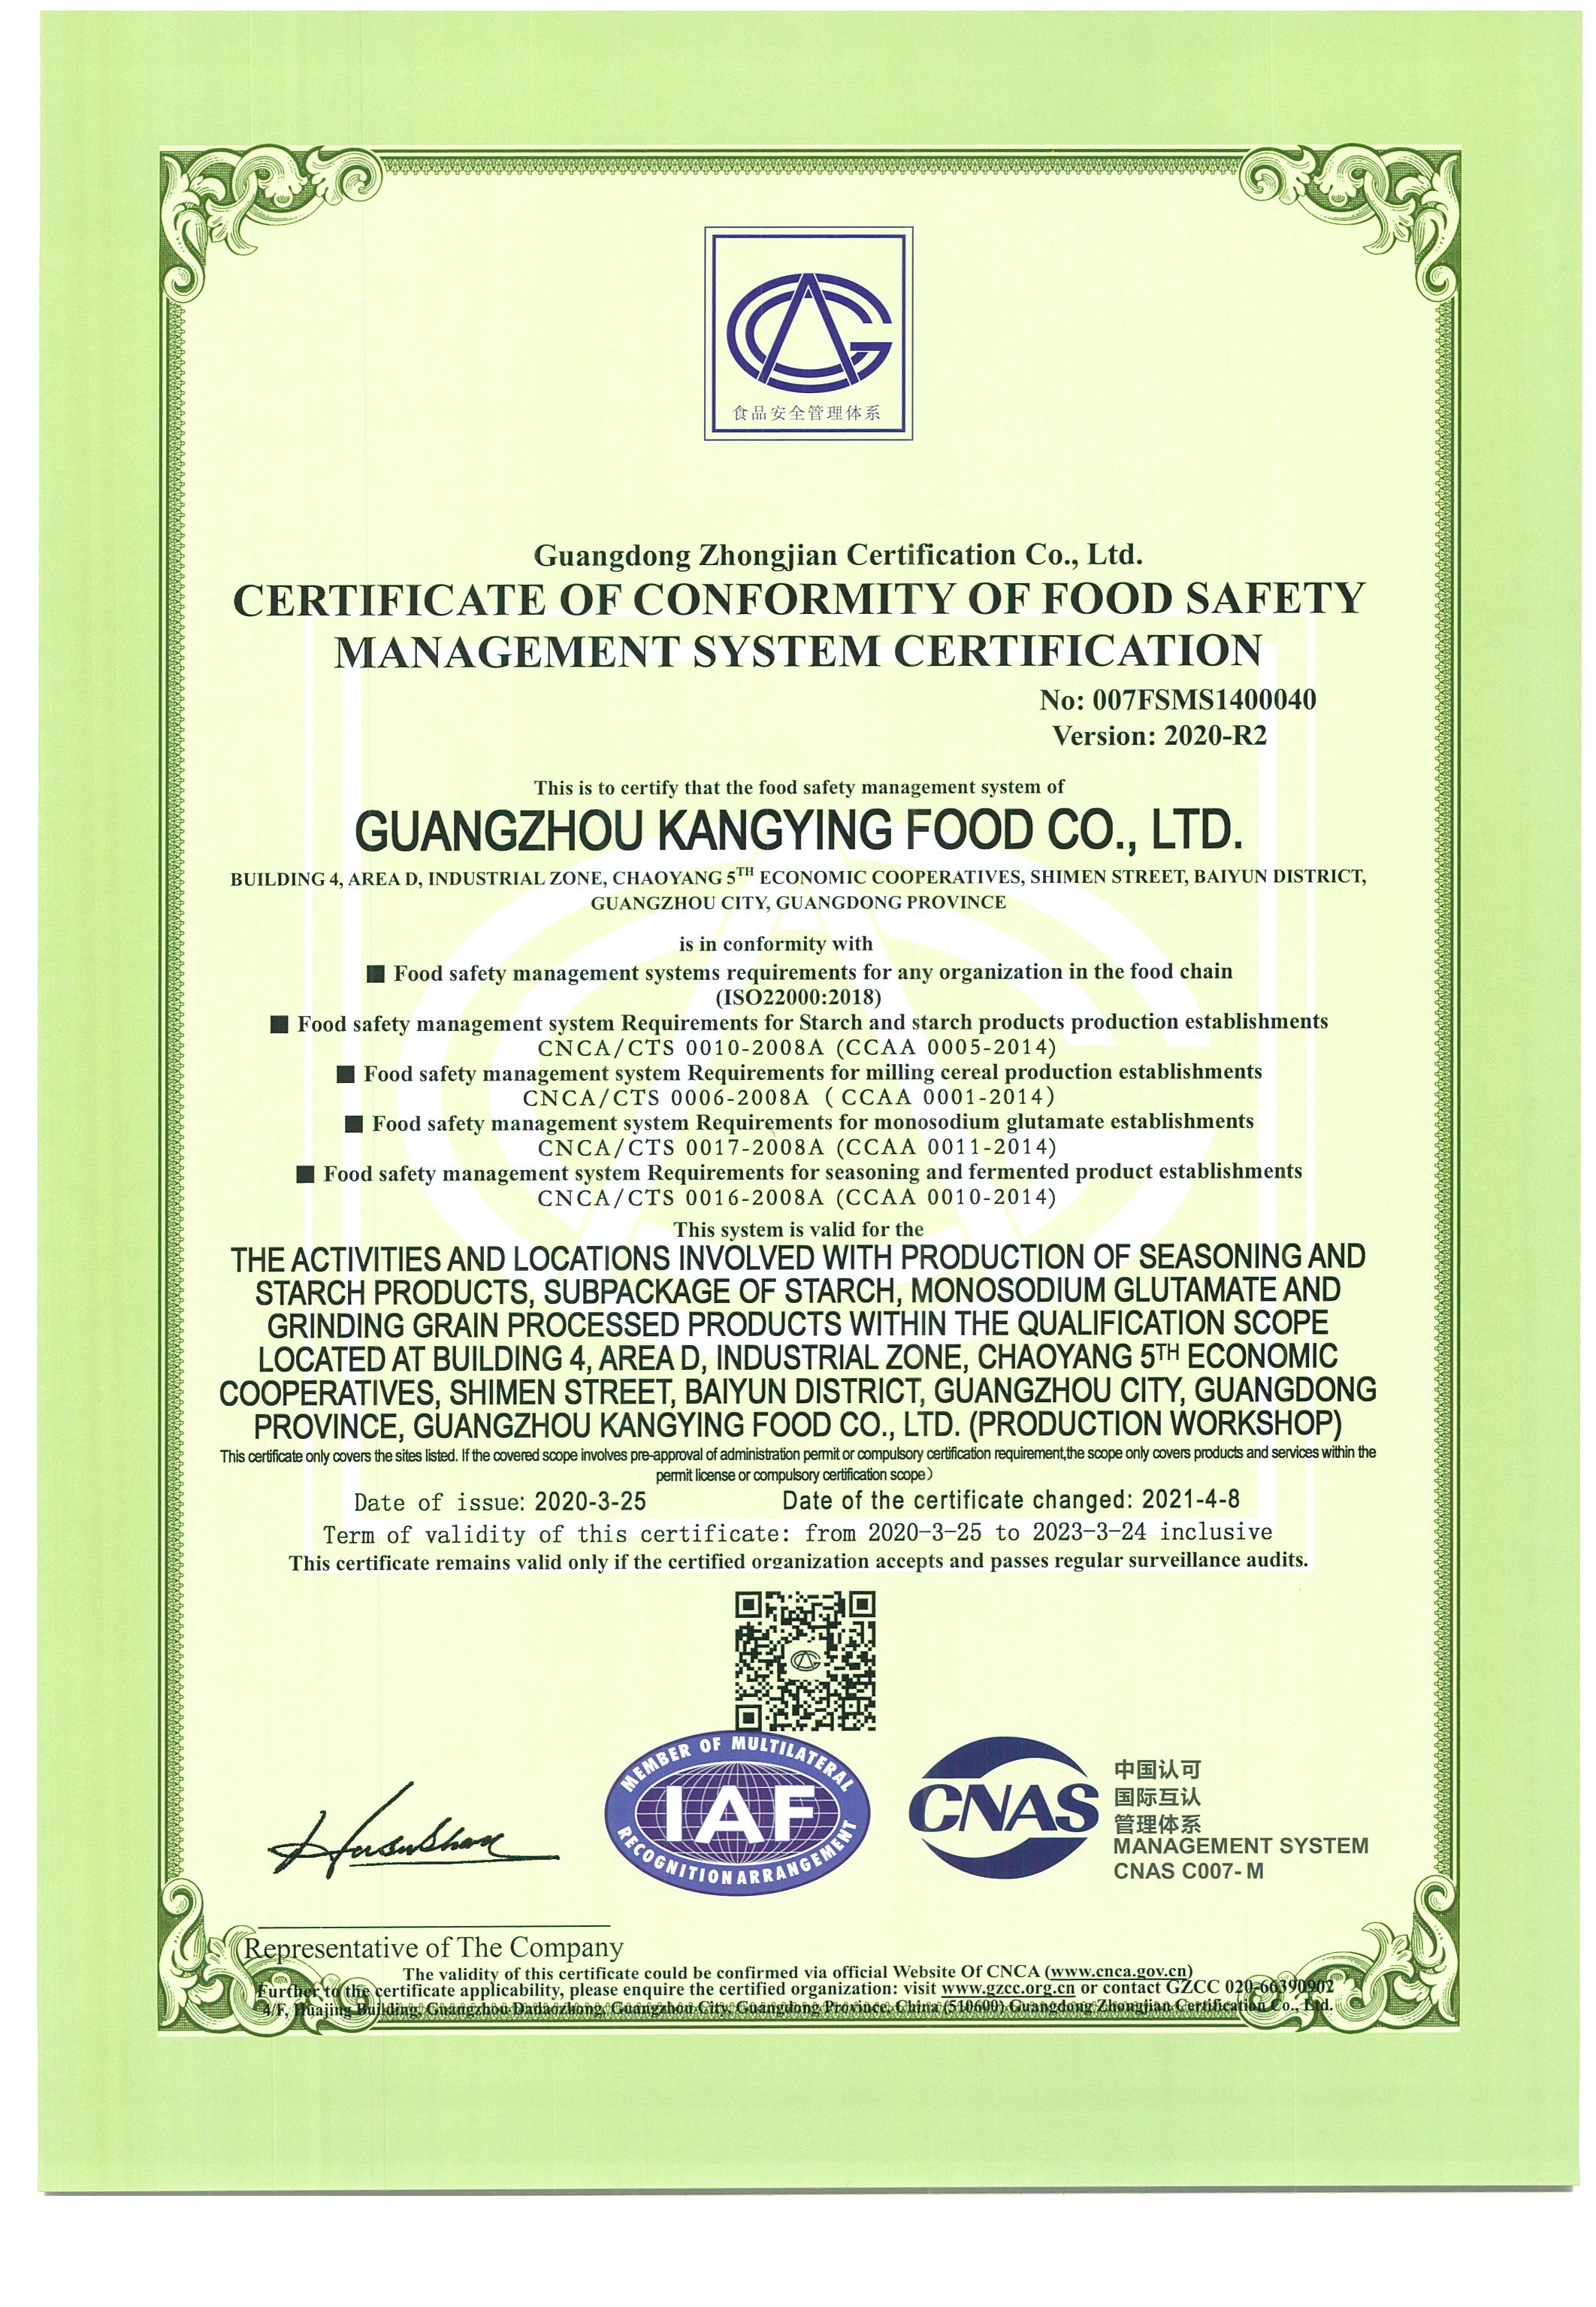  ISO:22000 (Food Safety Management System Certification)